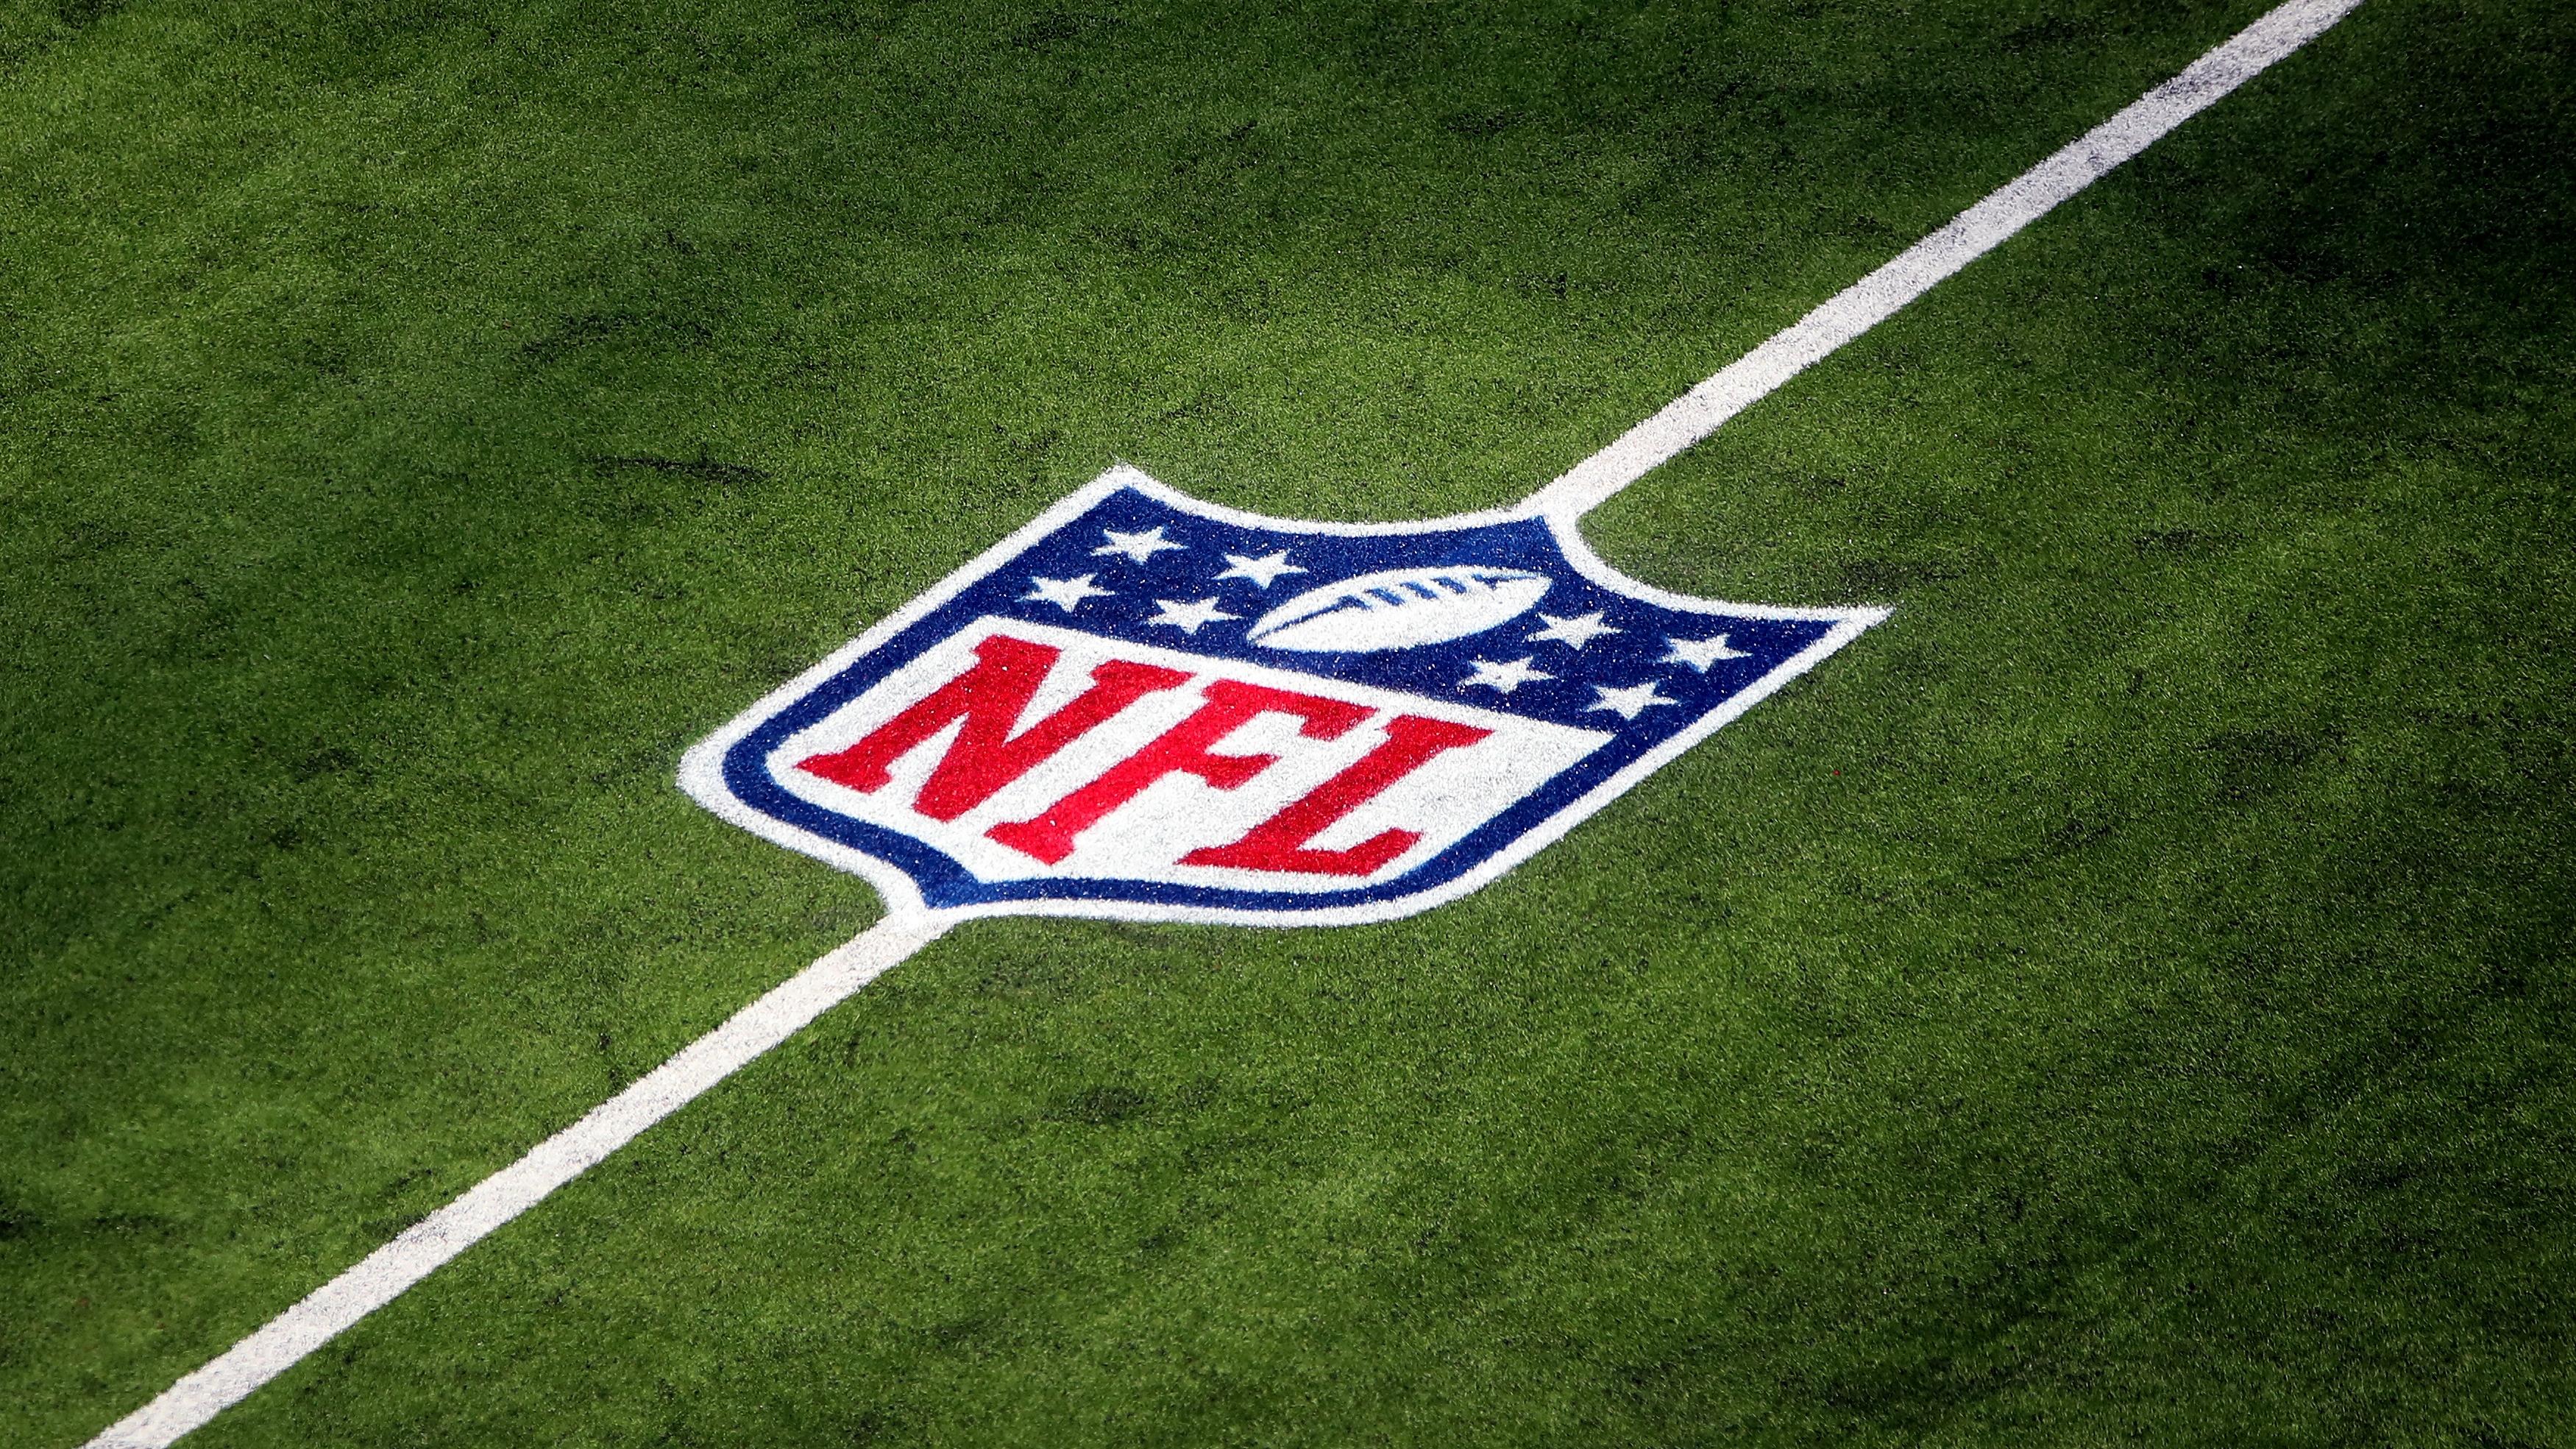 nfl sunday ticket moving to streaming